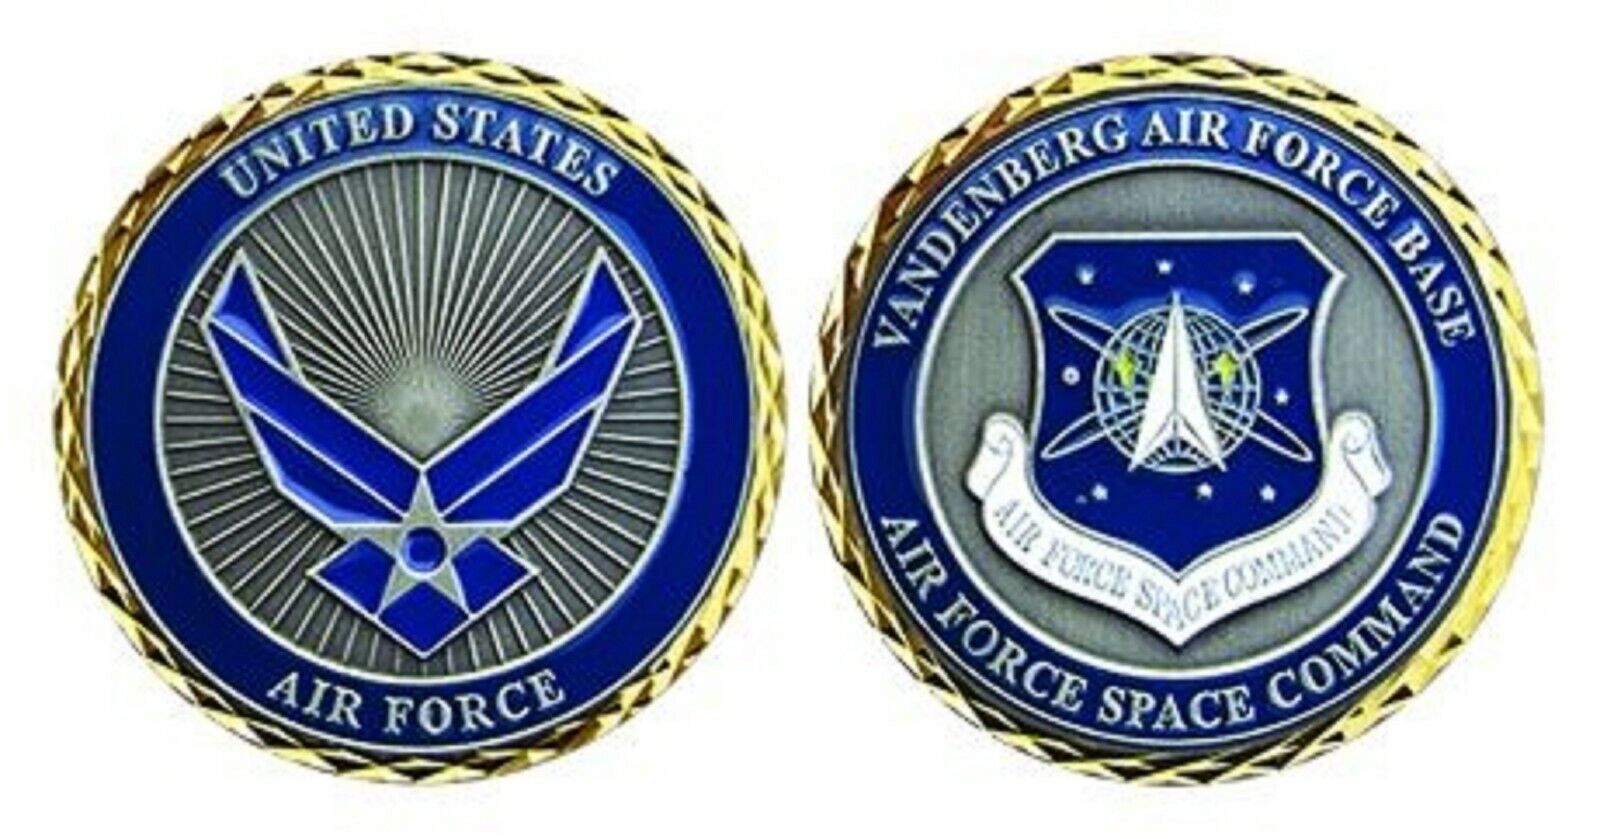 VANDENBERG AIR FORCE BASE SPACE COMMAND 1.75\